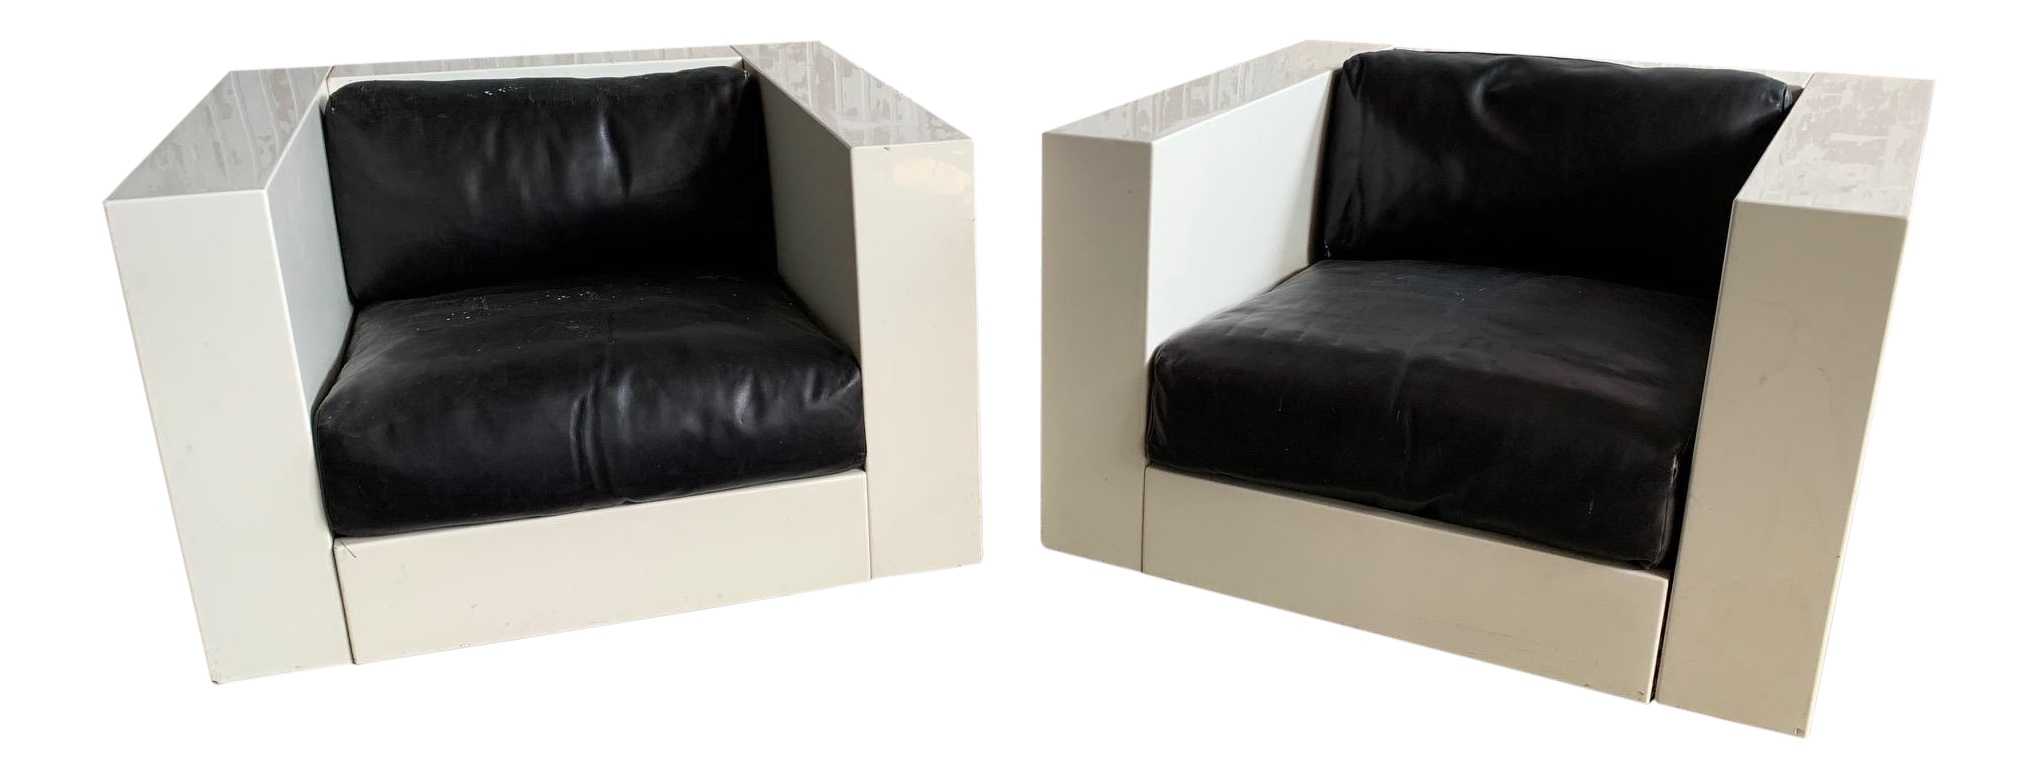 Pair of Saratoga Chairs by Massimo Vignelli for Poltronova